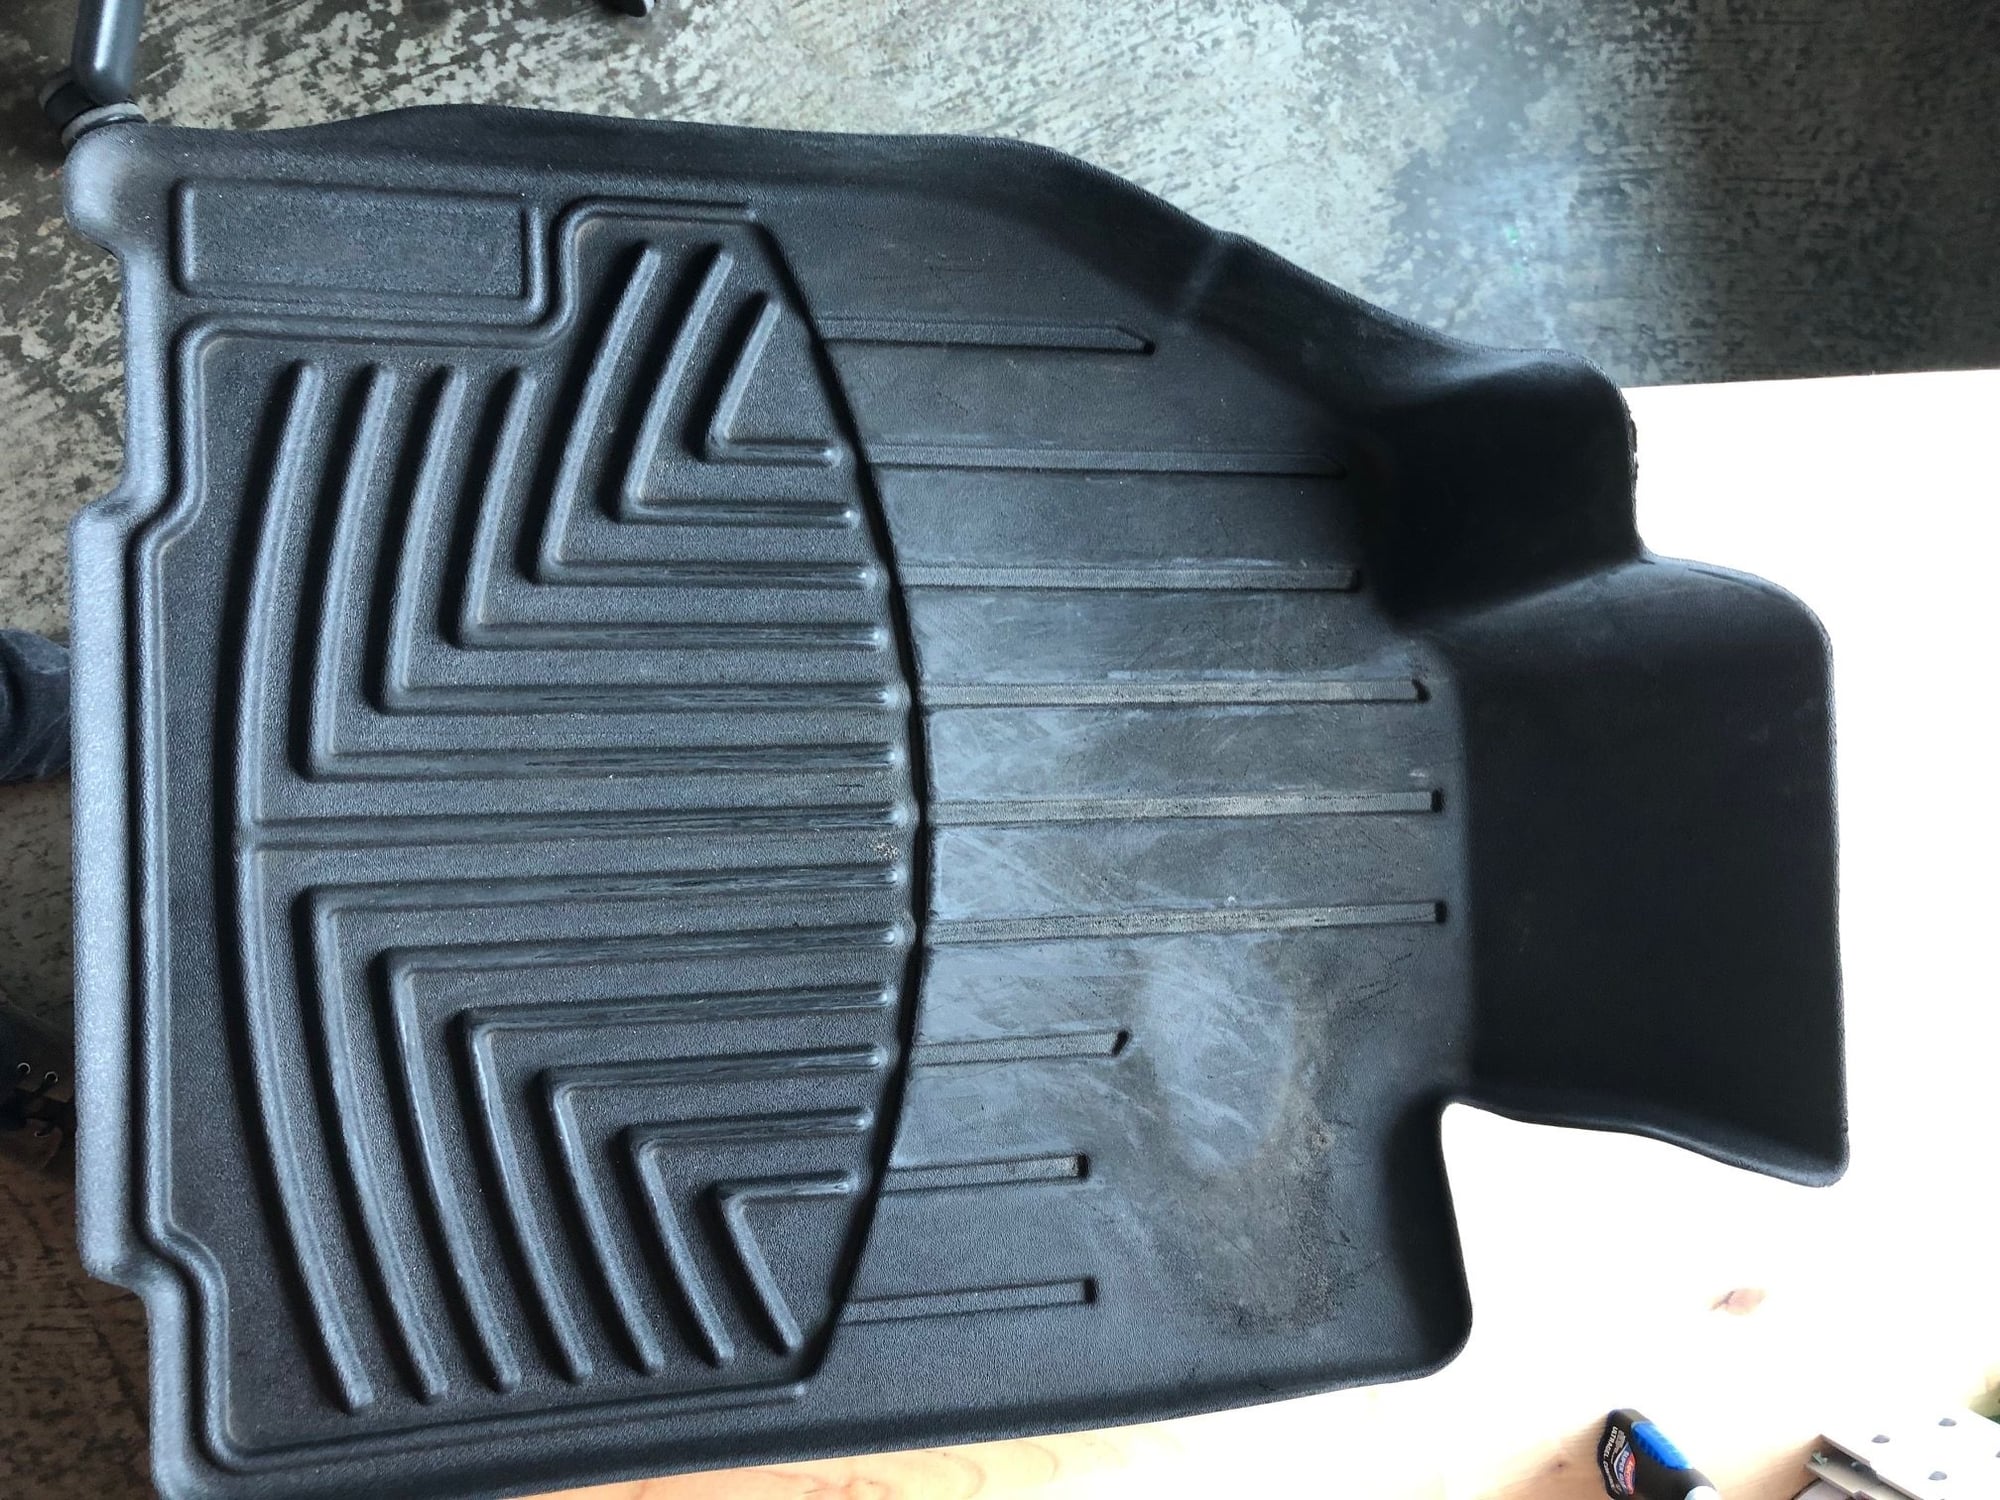 Interior/Upholstery - 997 Rear seats, weather tech floor mats, driving gloves - Used - 2005 to 2015 Porsche 911 - Jersey City, NJ 07306, United States